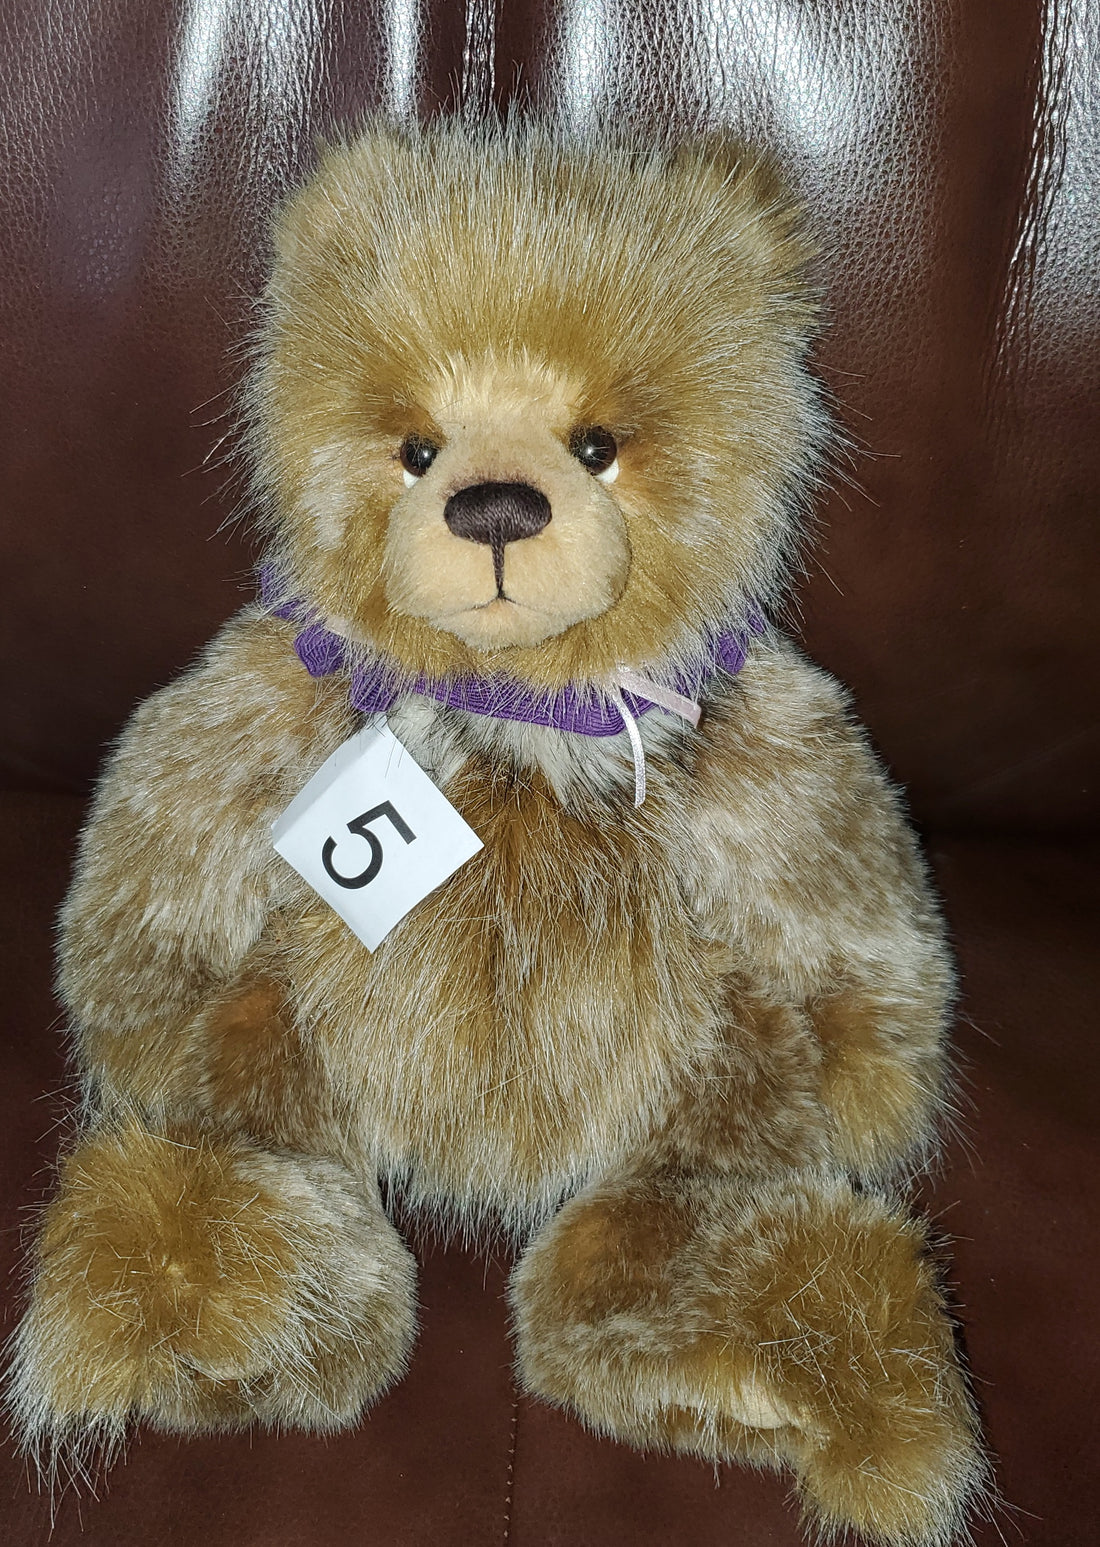 Pashmina - 15” Plush from Charlie Bears Secret Collection